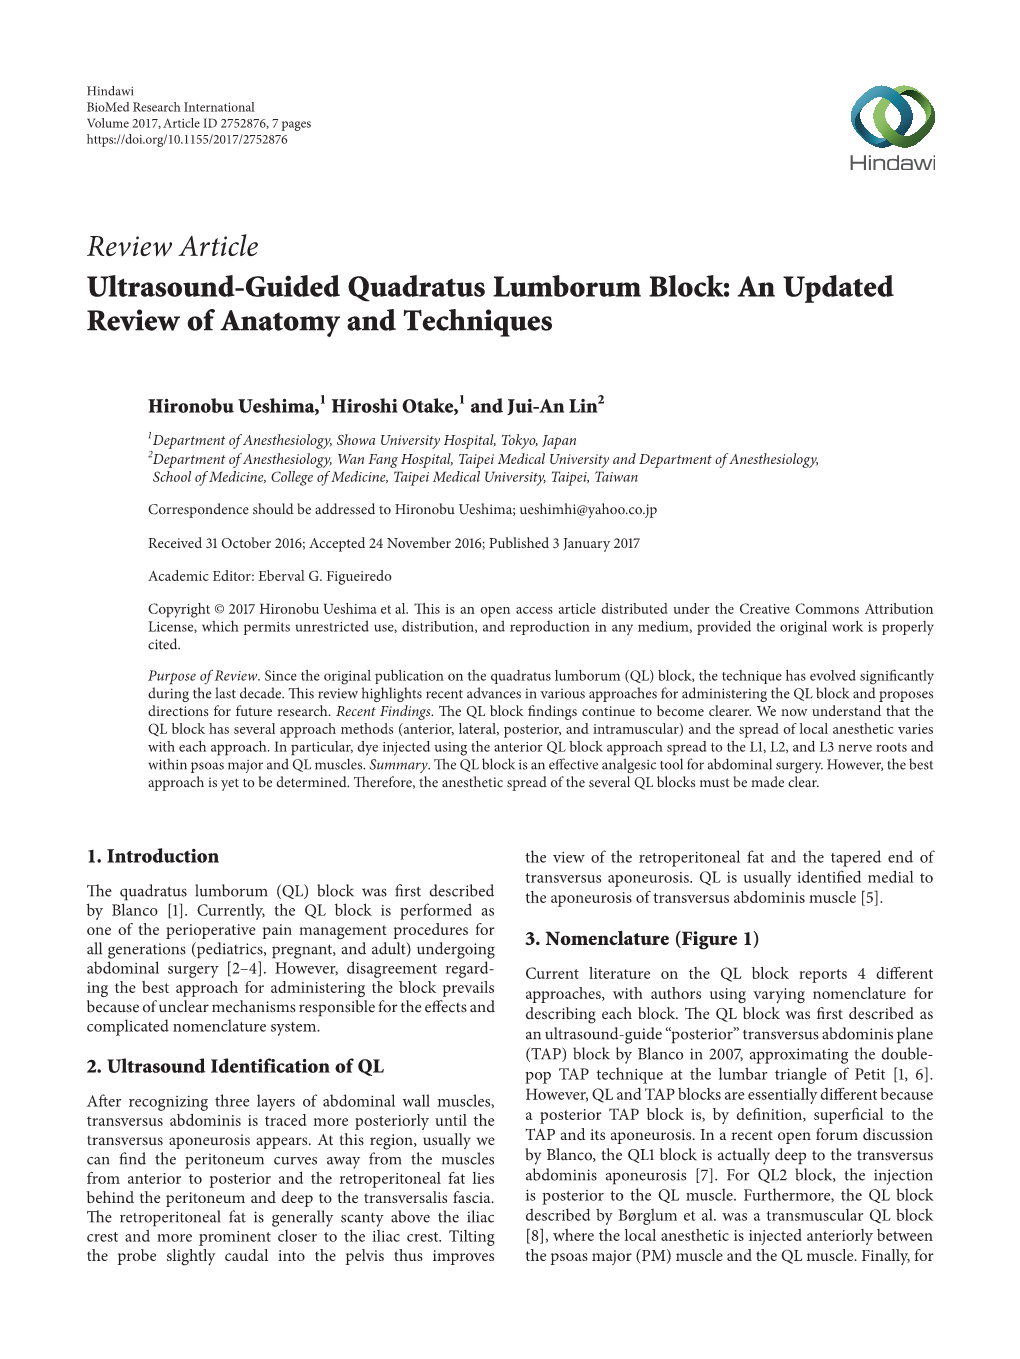 Review Article Ultrasound-Guided Quadratus Lumborum Block: an Updated Review of Anatomy and Techniques